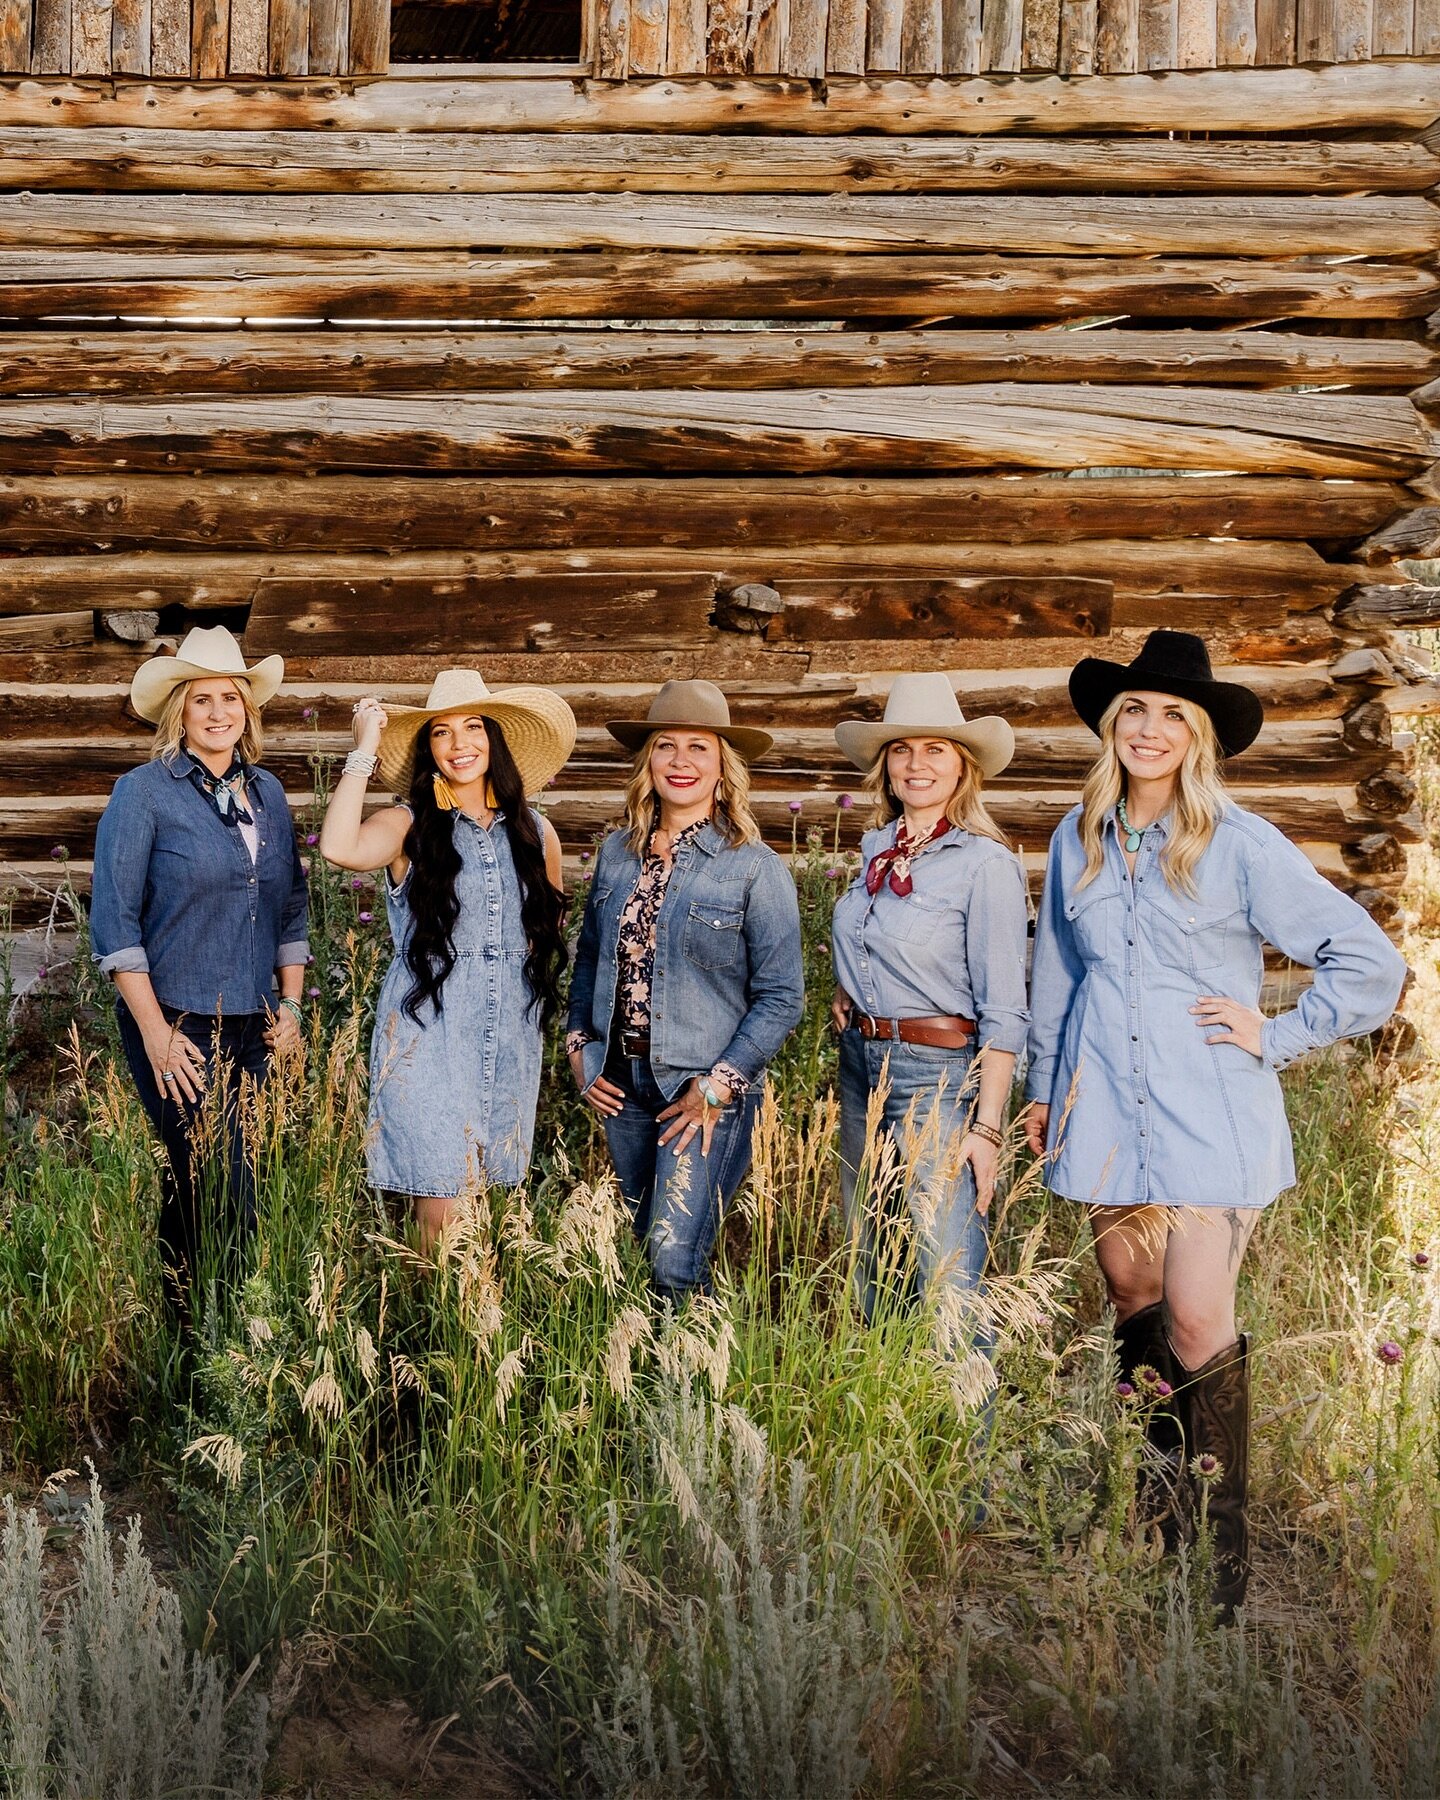 Styling: The Scout Guide Park City |&nbsp;@thedermatologyhouse

Reminiscing on a western inspired theme and a magical sunset with the amazing Dr. Kelly Stankiewicz and her beautiful team at The Dermatology House&nbsp;for Volume 5 of&nbsp;@tsgparkcity